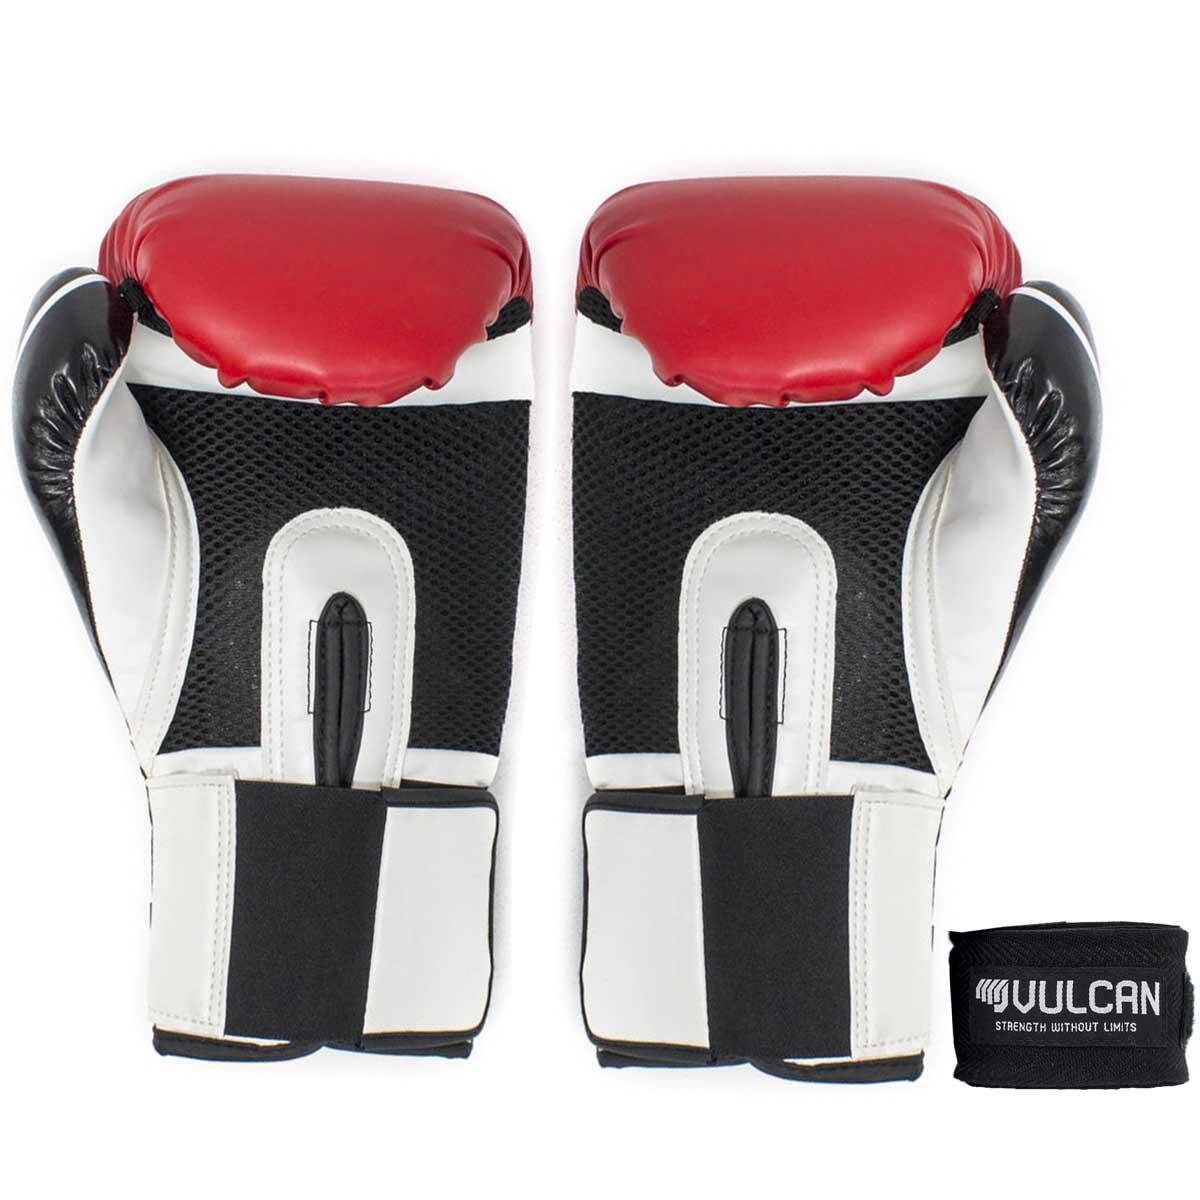 VULCAN BOXING GLOVES 14oz RED/BLACK WITH HANDWRAPS 5/7